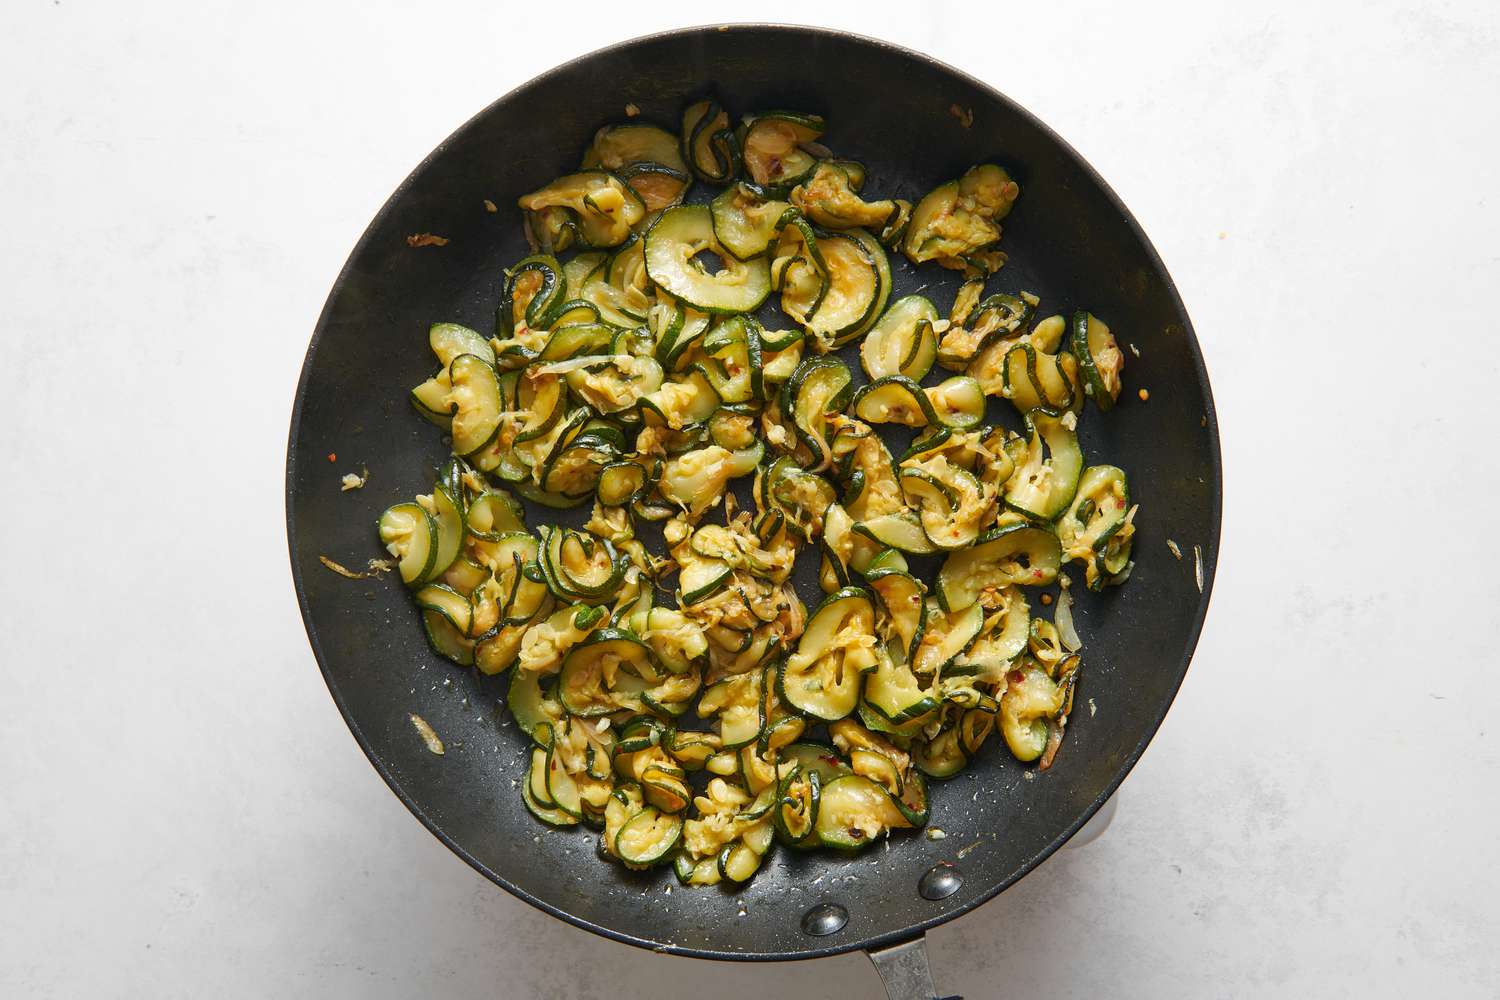 A skillet of cooked zucchini and shallots, with minced garlic and red pepper flakes